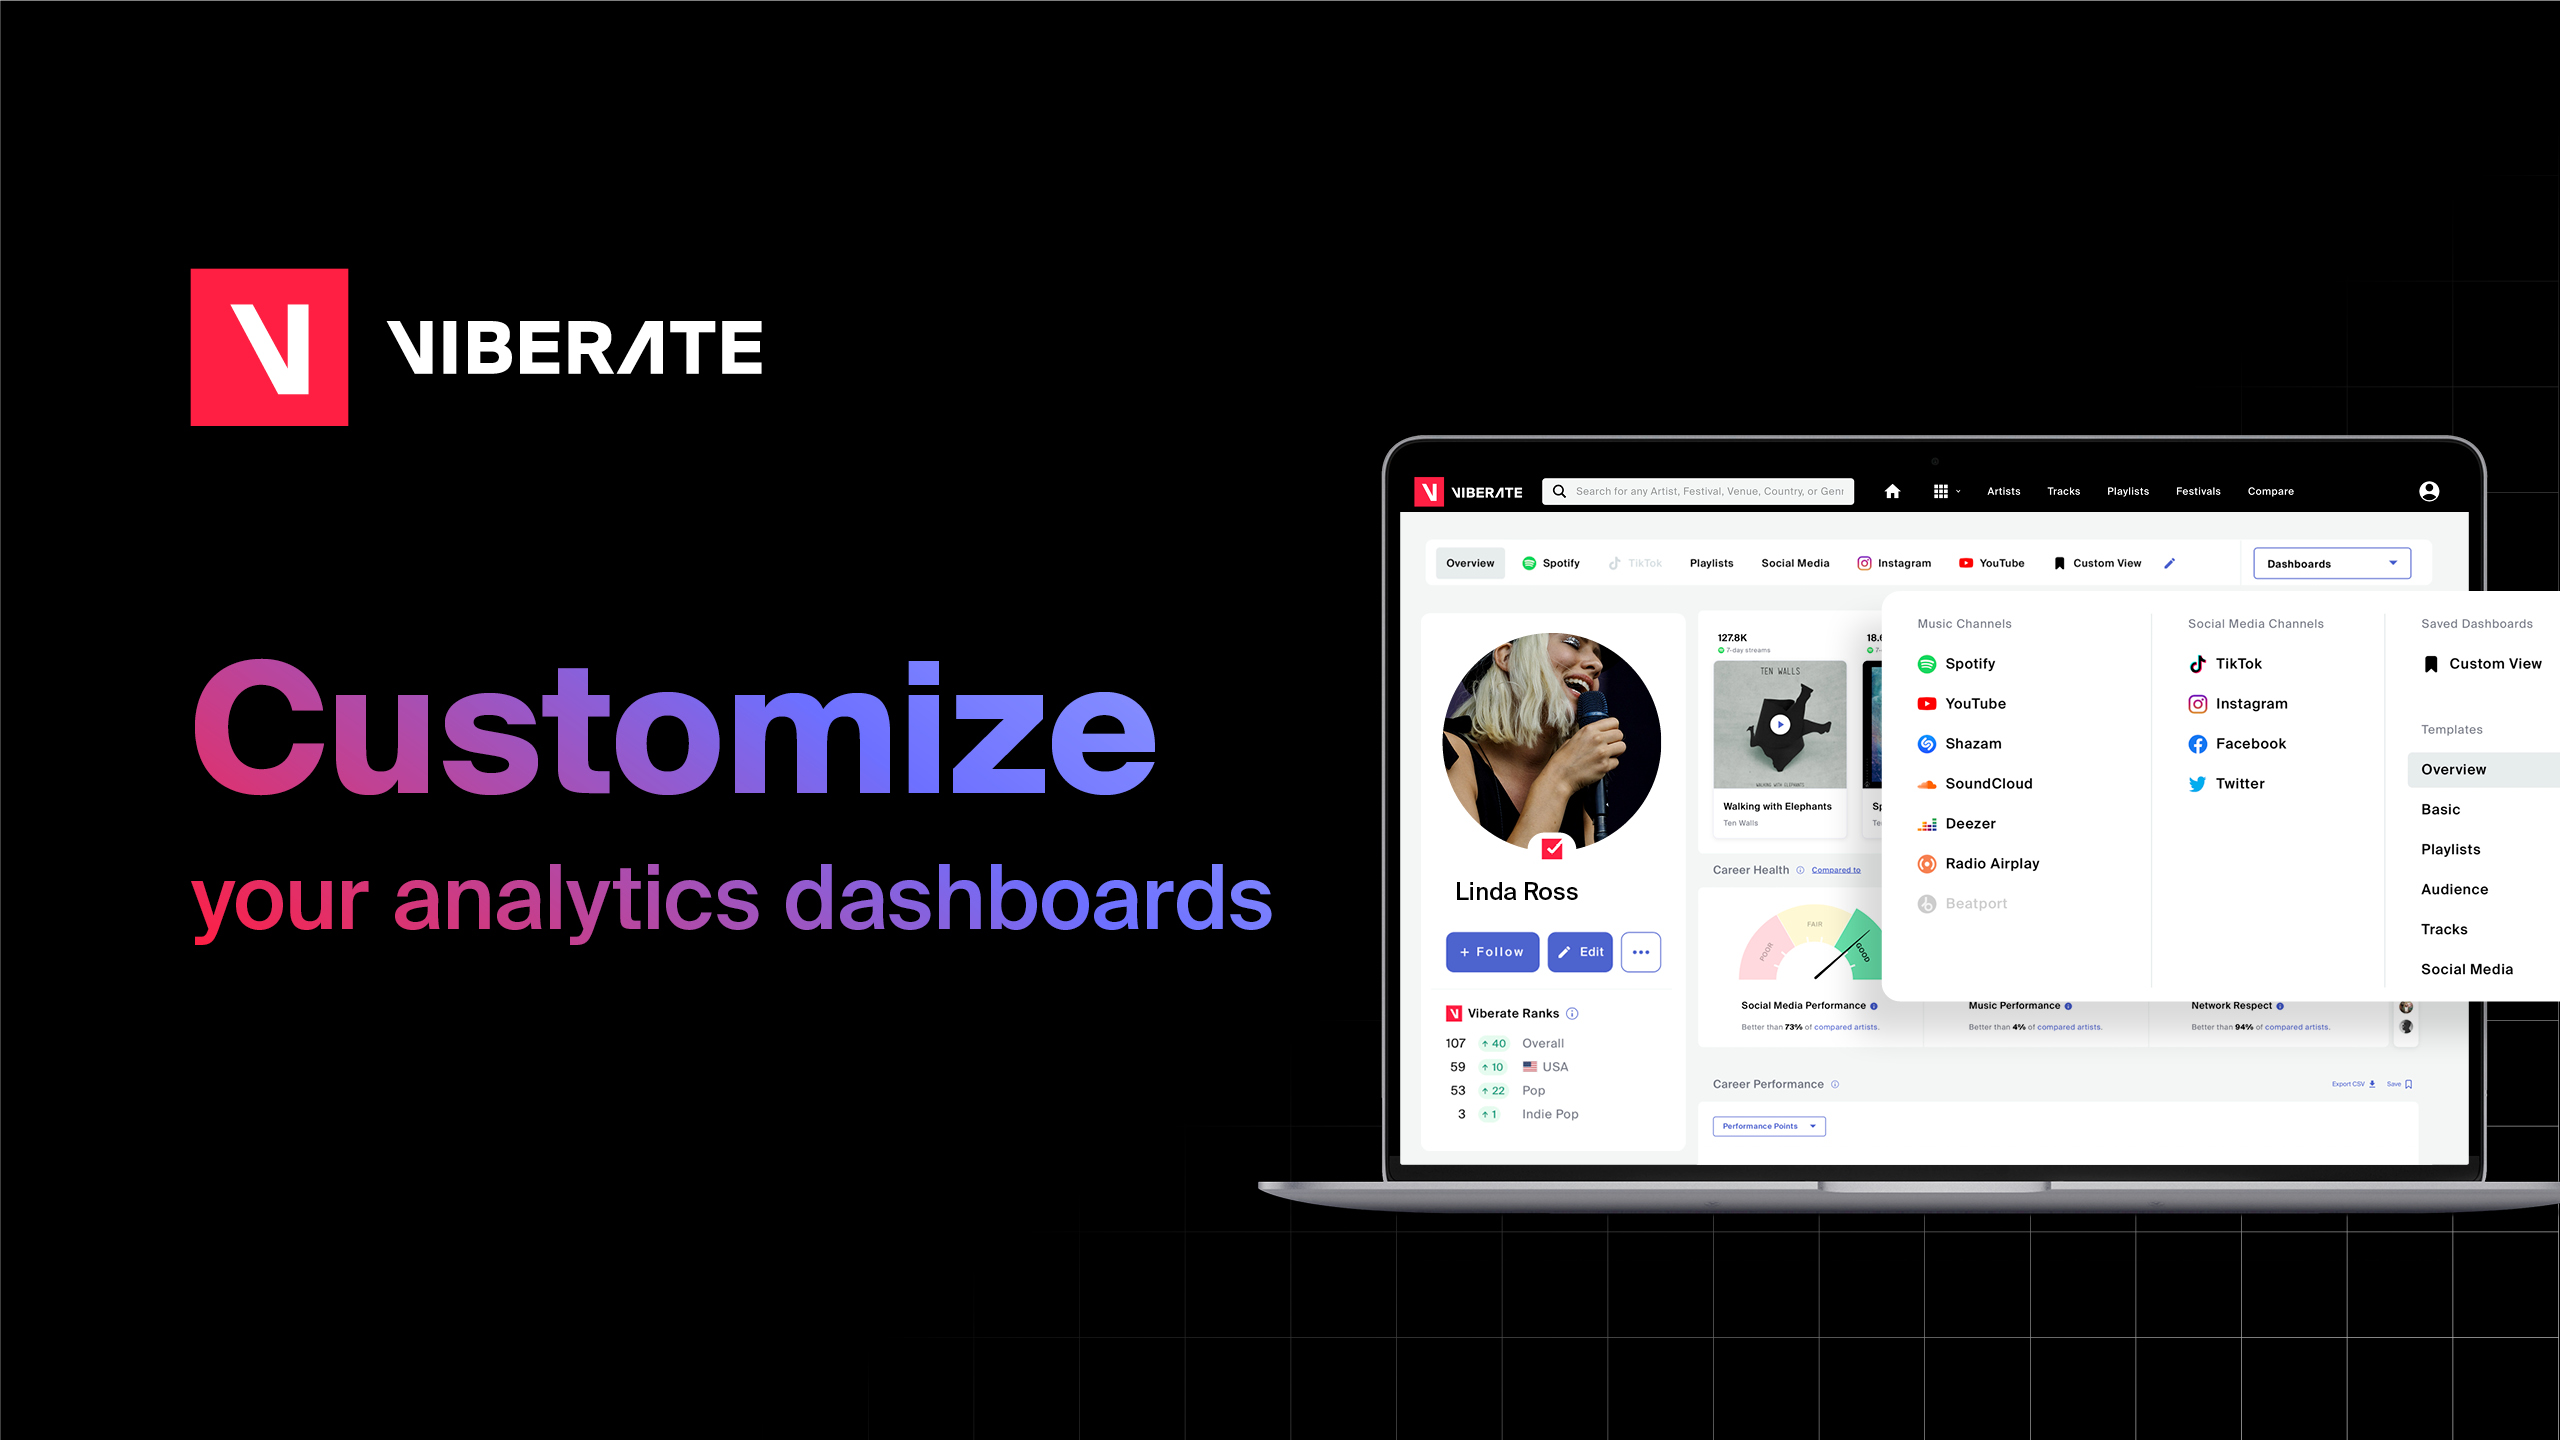 Need Some Help with Customizing Your Dashboards?